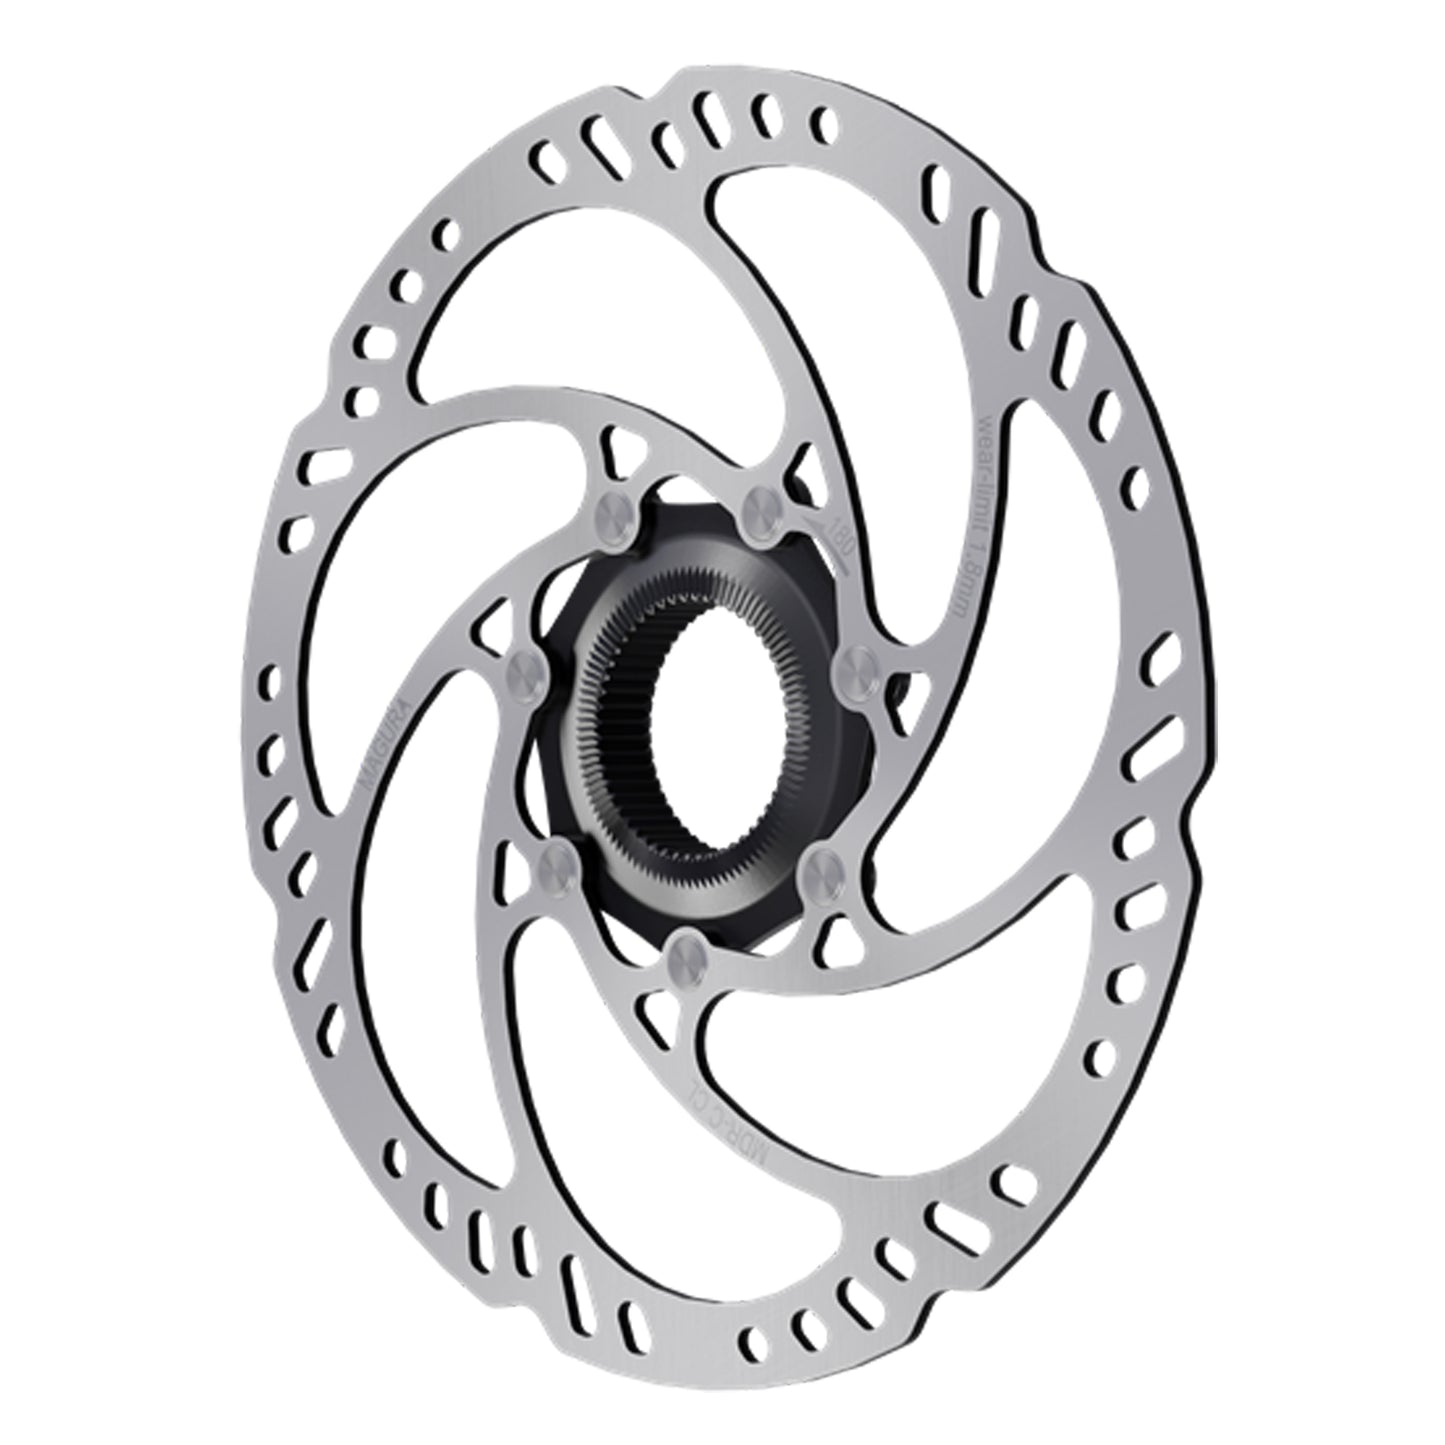 NEW Magura MDR-C CL Disc Brake Rotor - 180mm Center Lock w/Lock Ring for Thru Axle eBike Optimized Silver